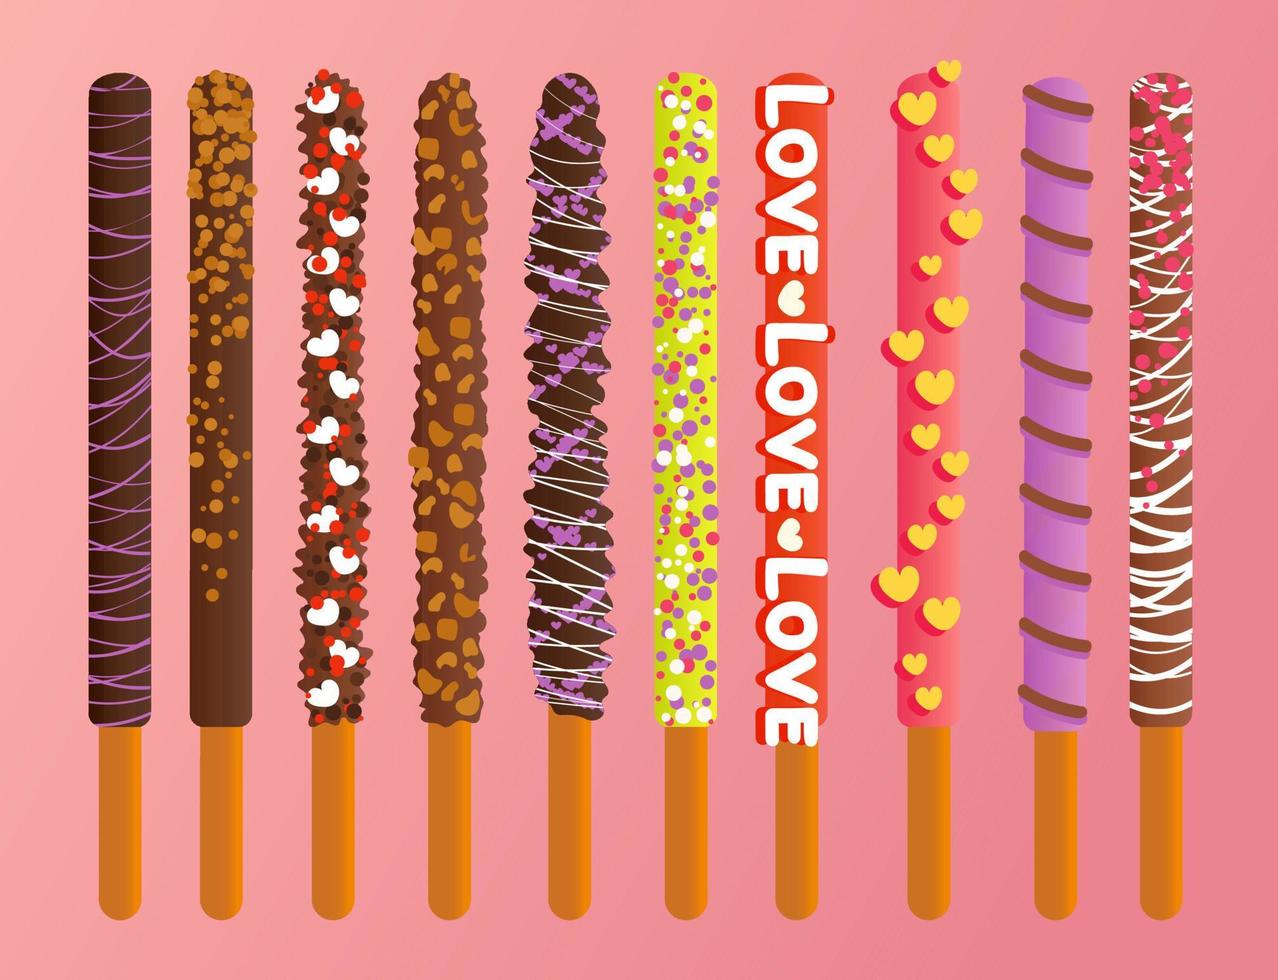 Happy pepero day set vector illustration isolated on pink background